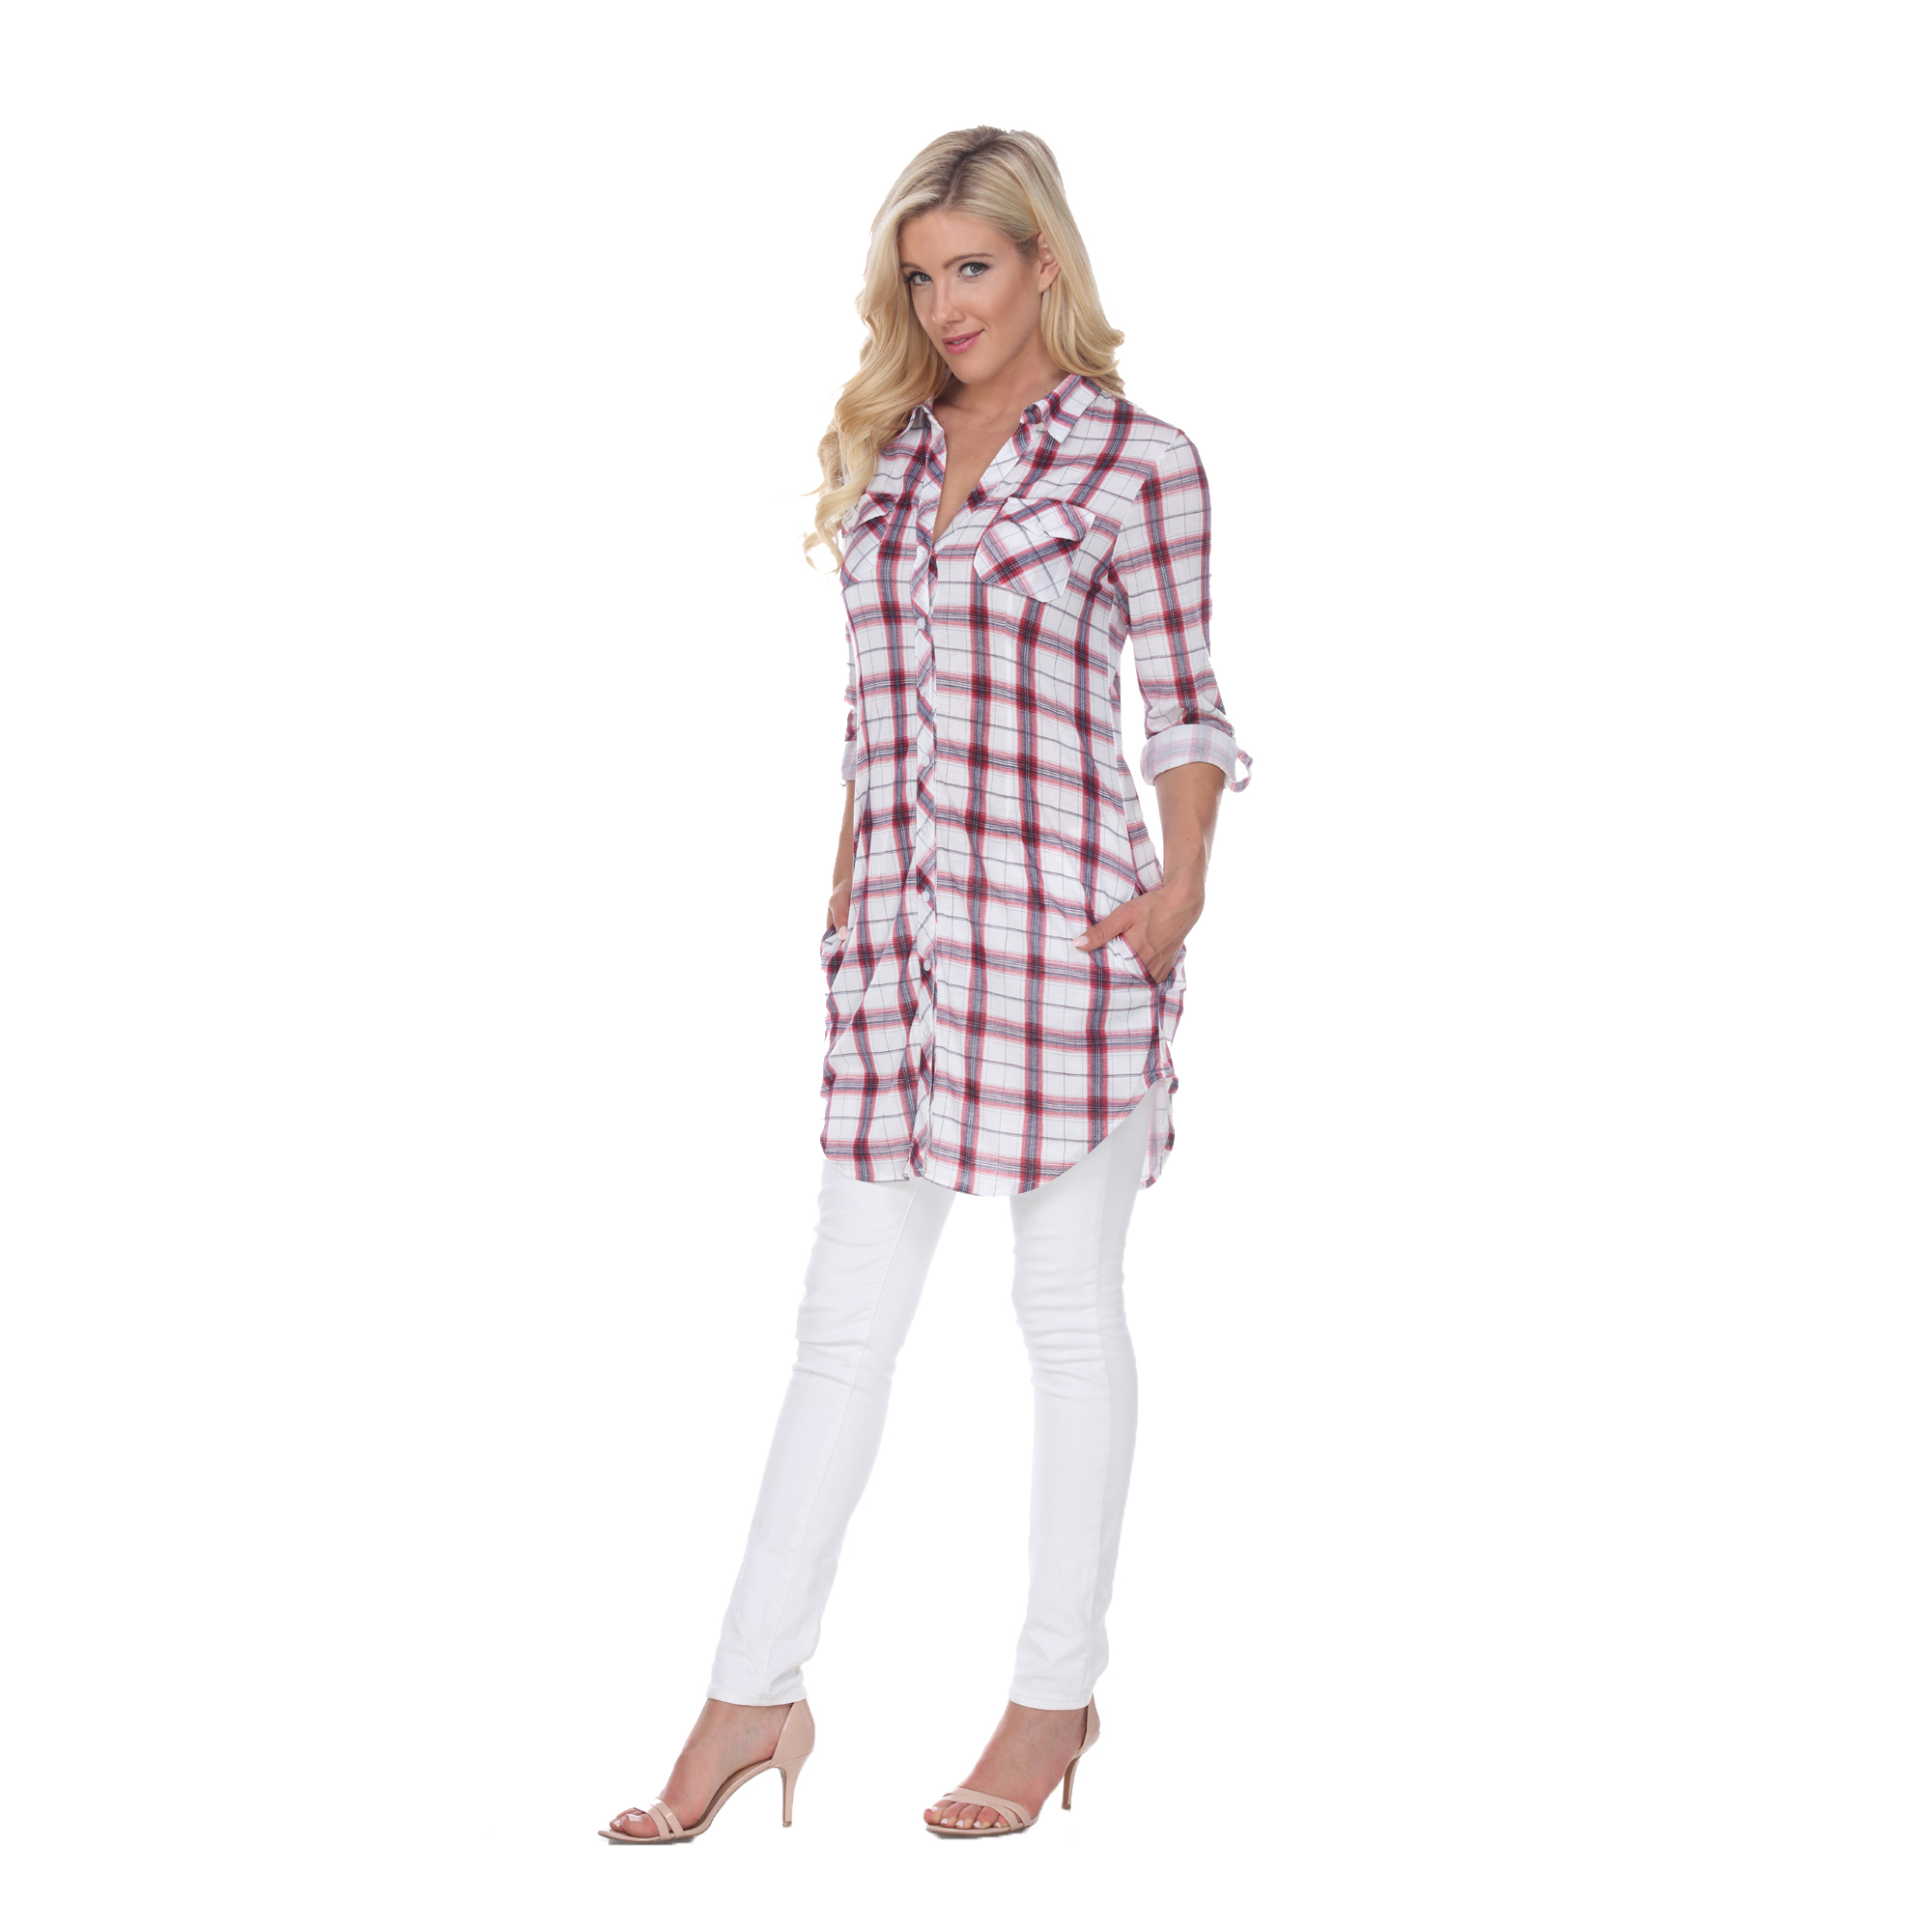 White Mark Women's Stretchy Plaid Flannel Tunic Top - Red/White, Large